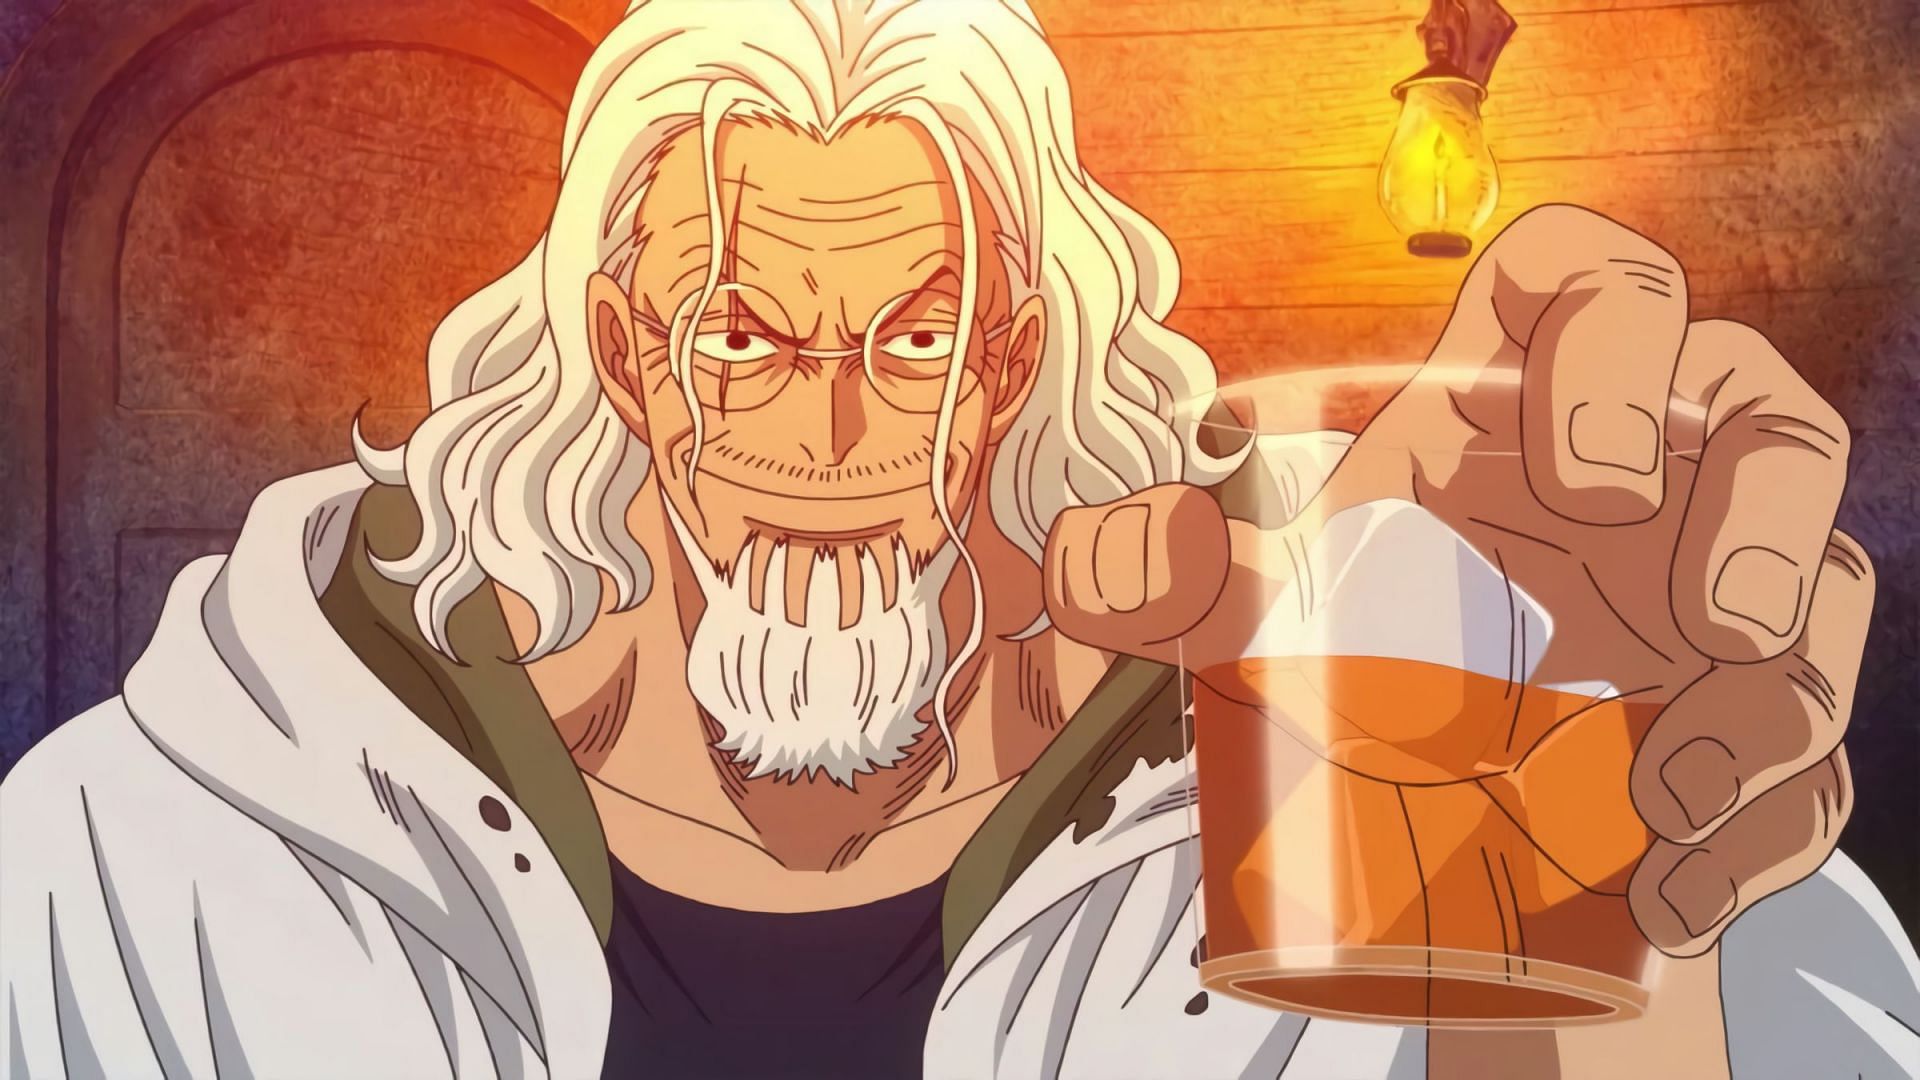 Rayleigh as seen in the series (Image via Toei Animation)